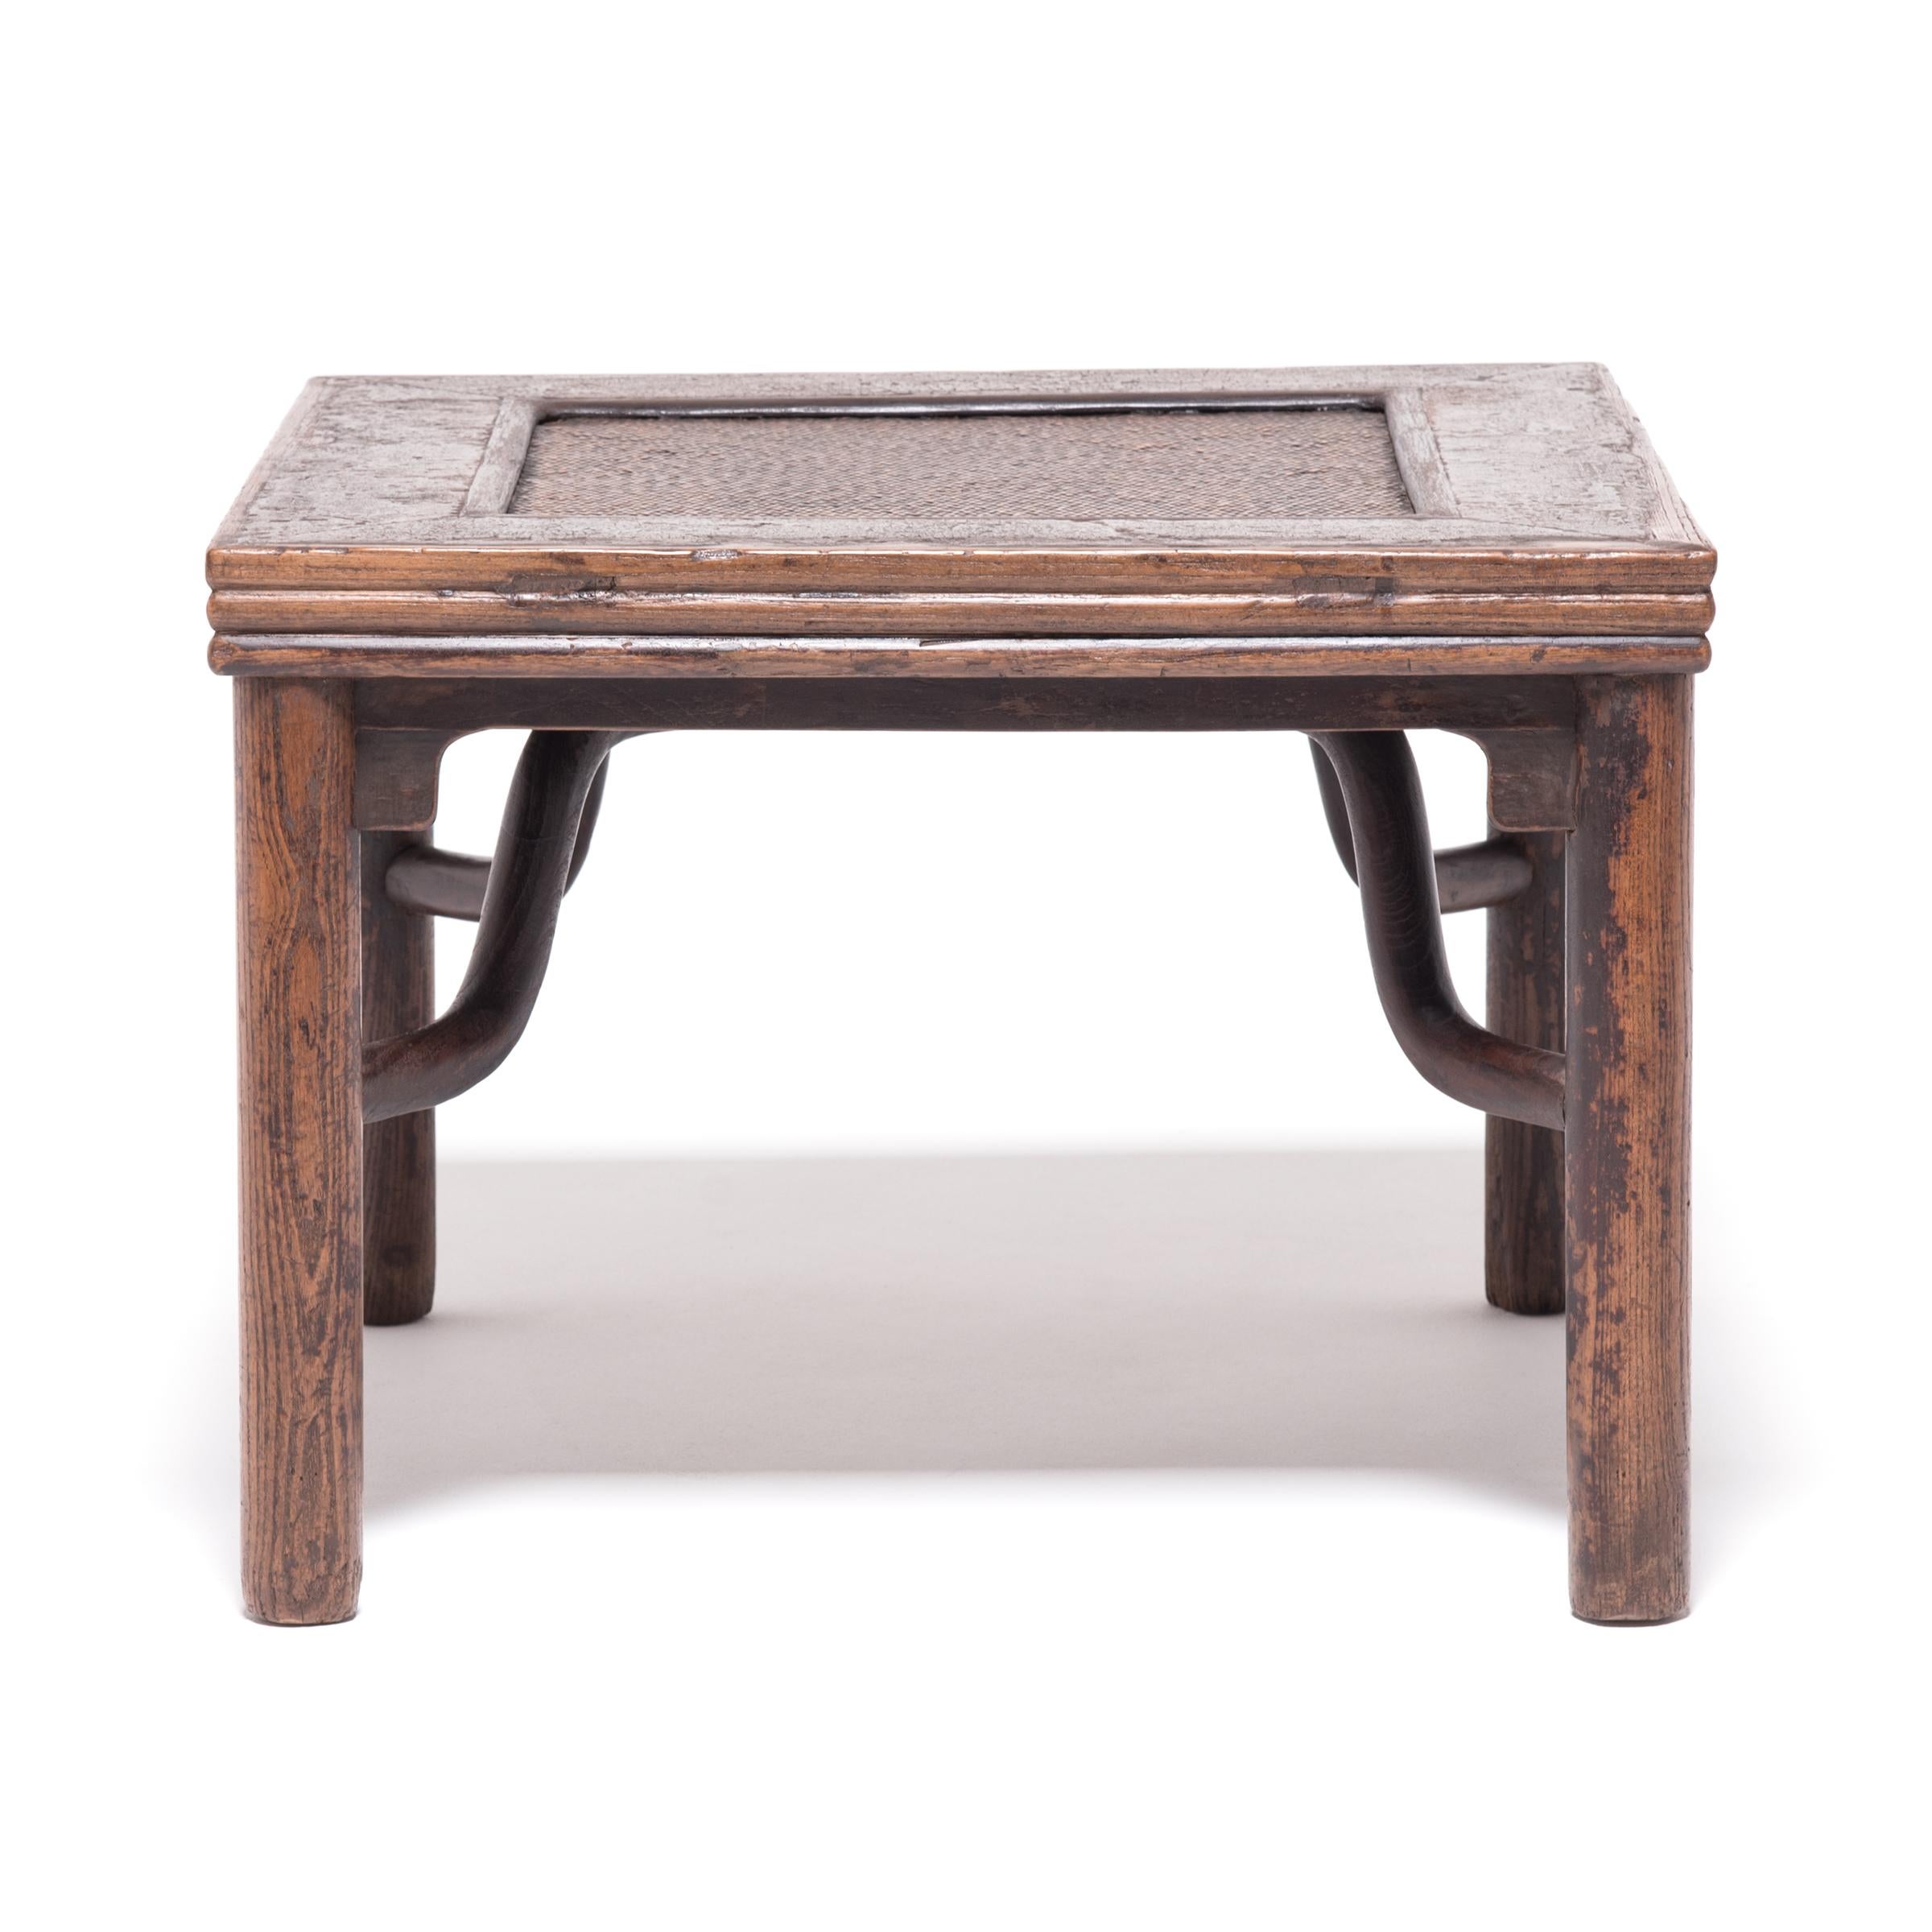 The fang deng, or square stool, form was popular for its simplicity and utility in the home. The simple legs, stacked edging, sinuous braces, and rattan top make this a particularly unique example. The timeworn finish combines with rattan and